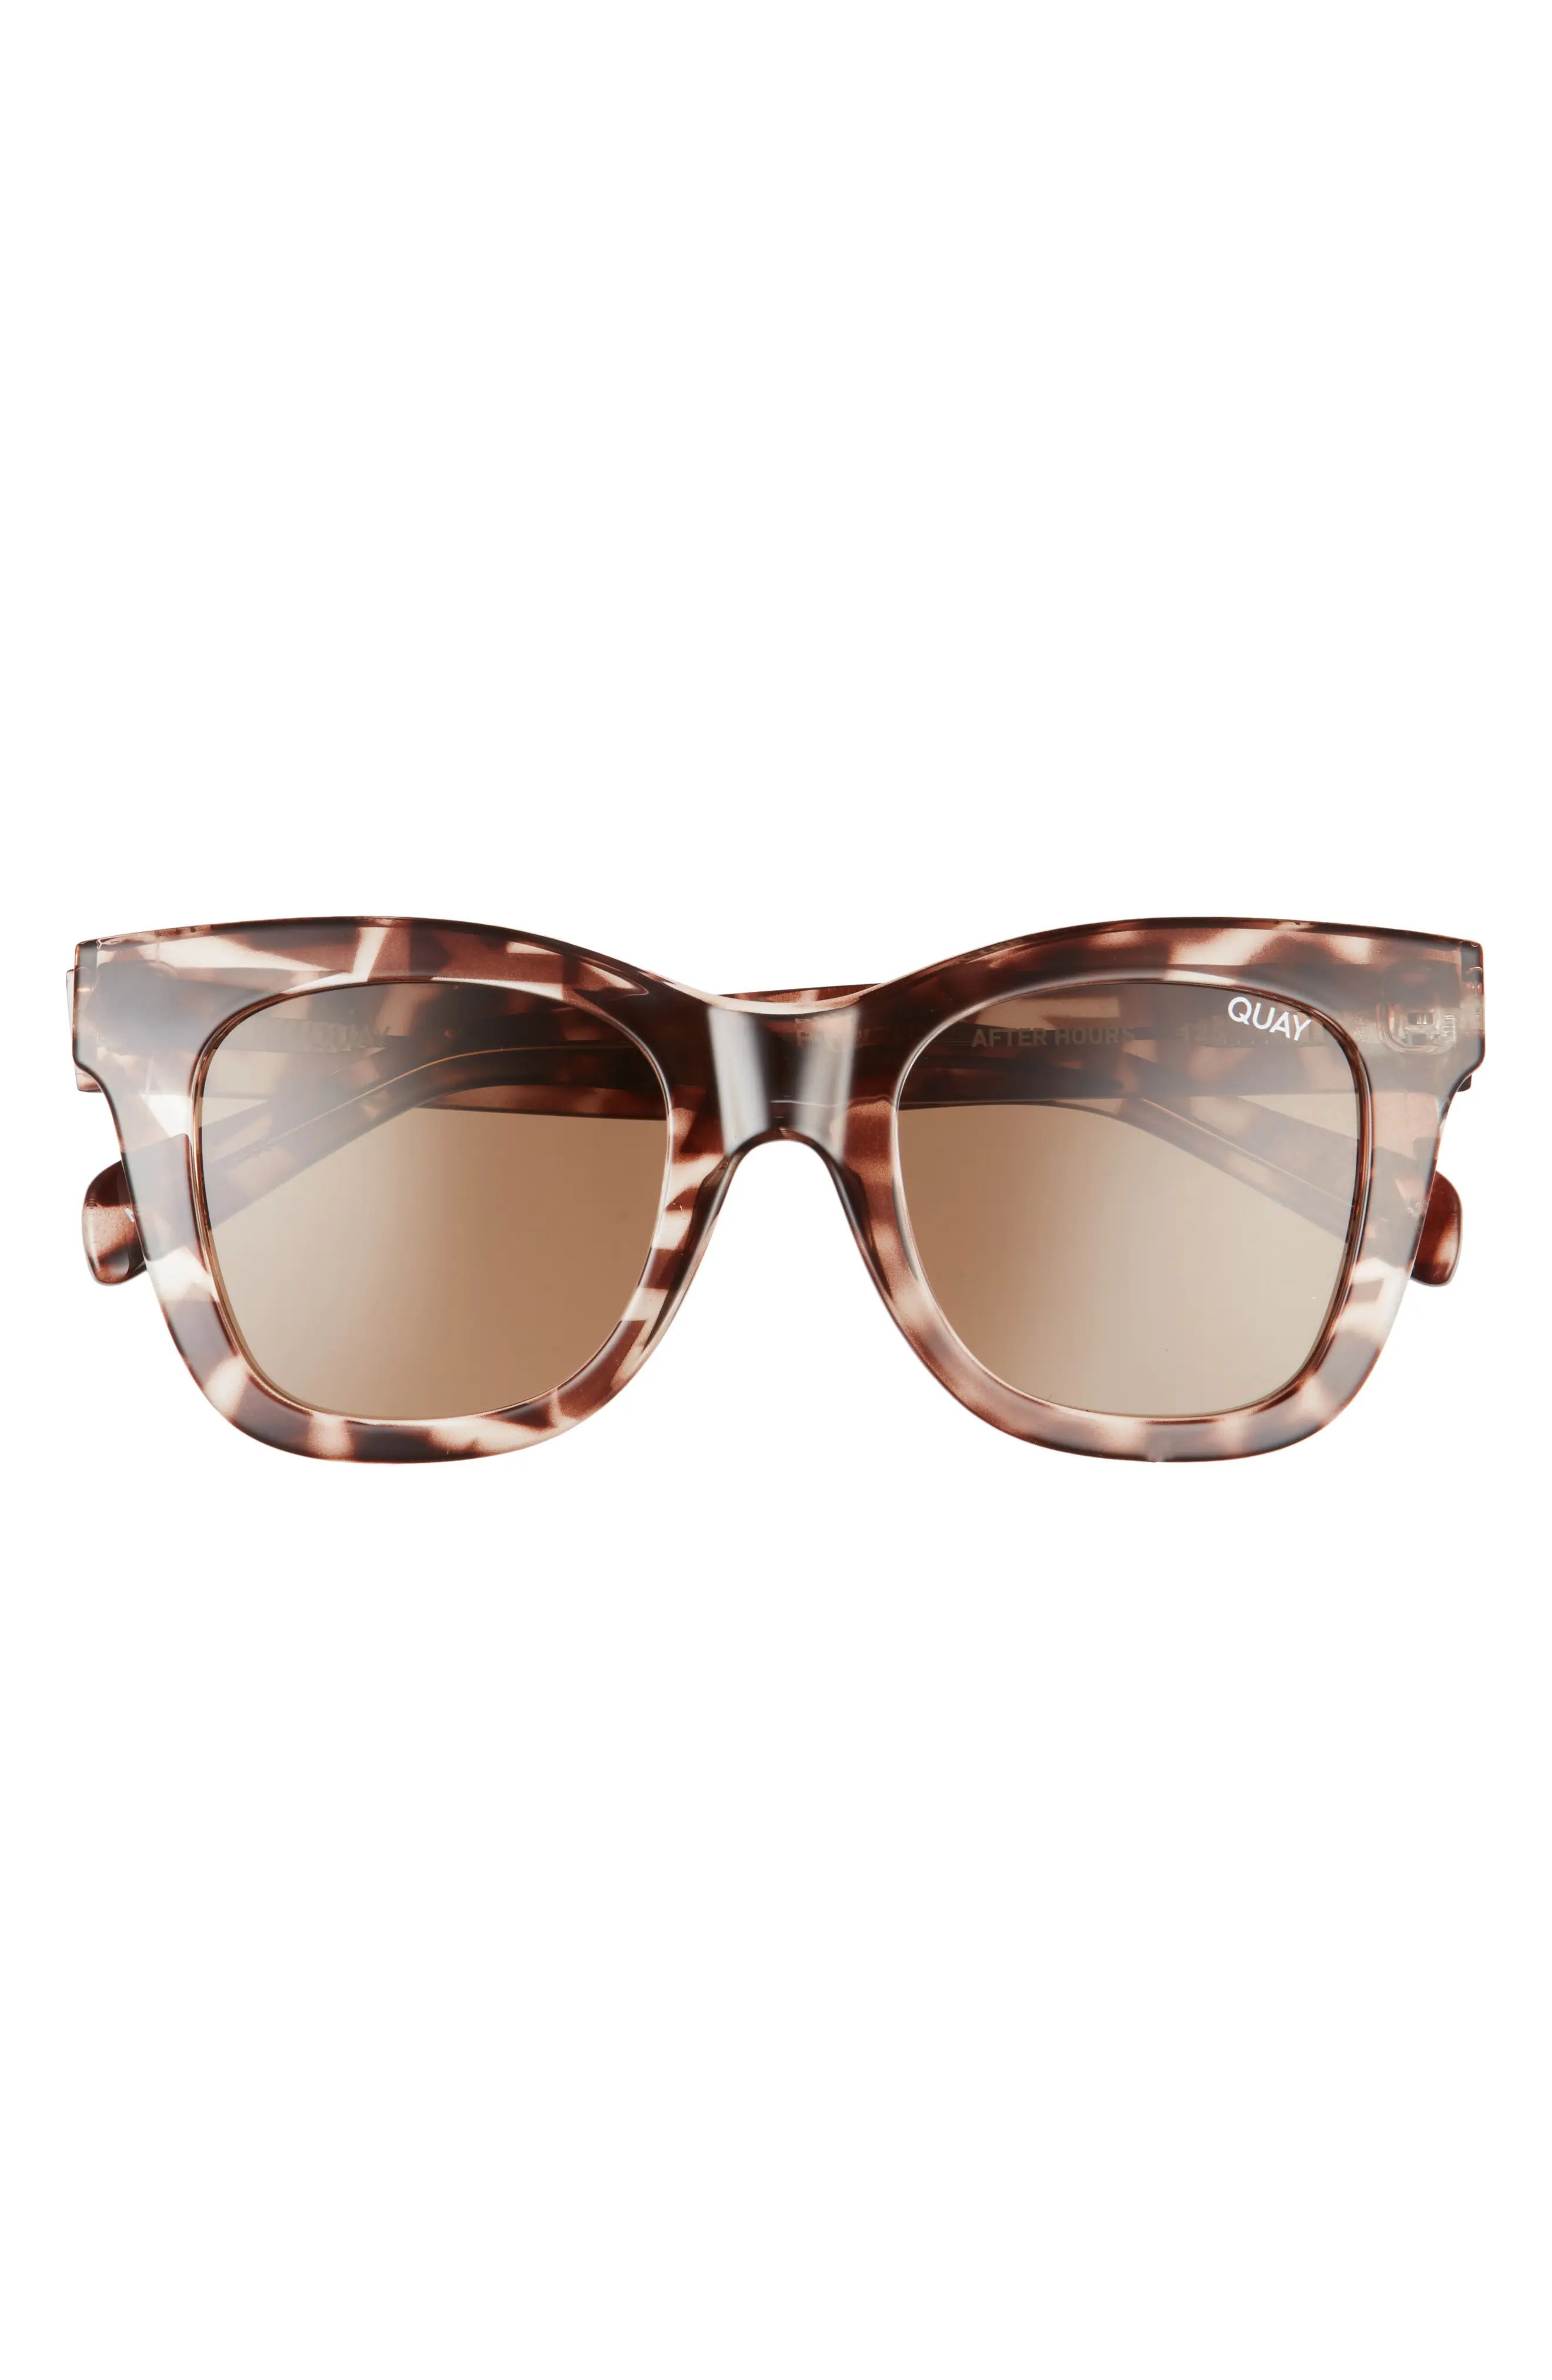 Quay Australia After Hours 50mm Polarized Square Sunglasses in Tort /Brown Polarized at Nordstrom | Nordstrom